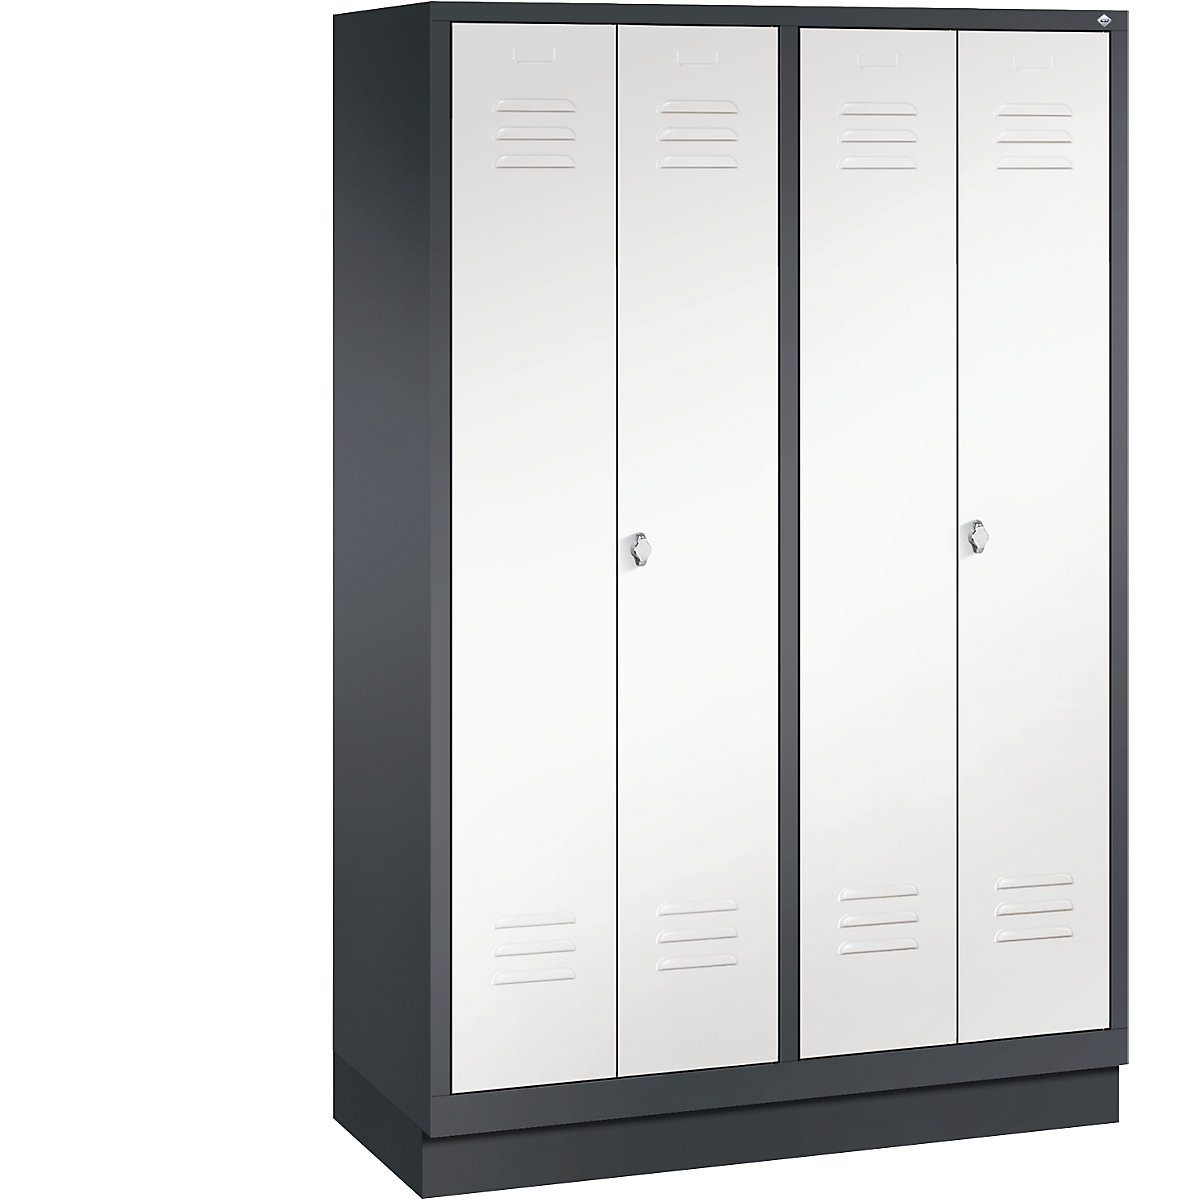 CLASSIC cloakroom locker with plinth, doors close in the middle – C+P, 4 compartments, compartment width 300 mm, black grey / traffic white-6